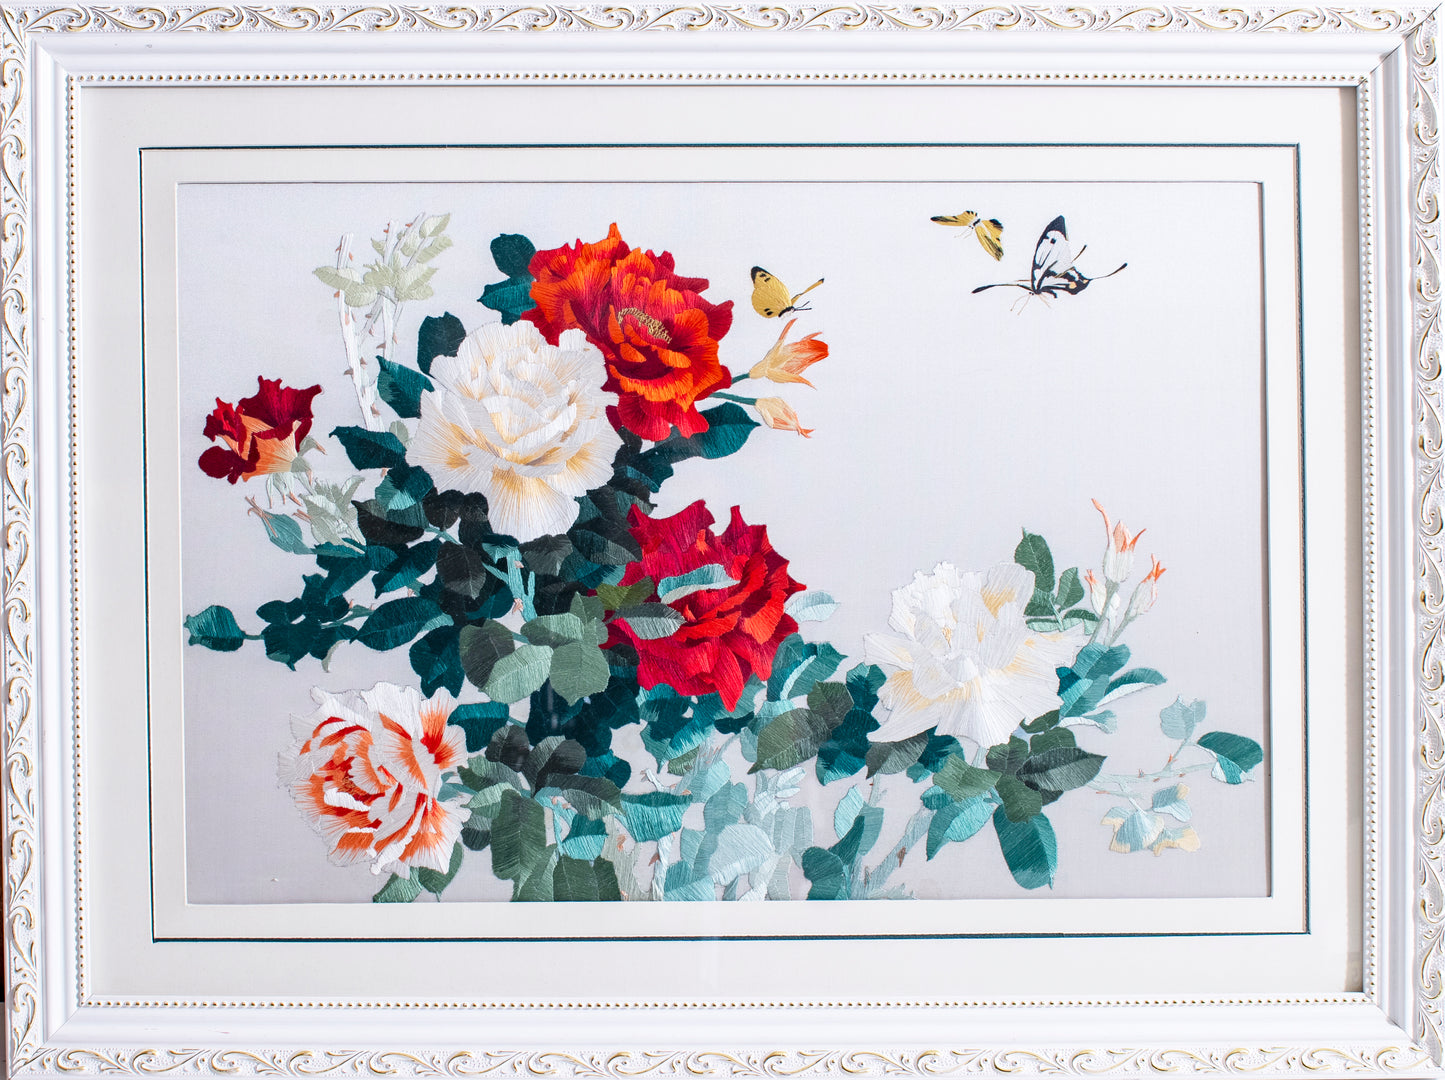 Butterfly and Flowers - Silk Art Framed and Matted